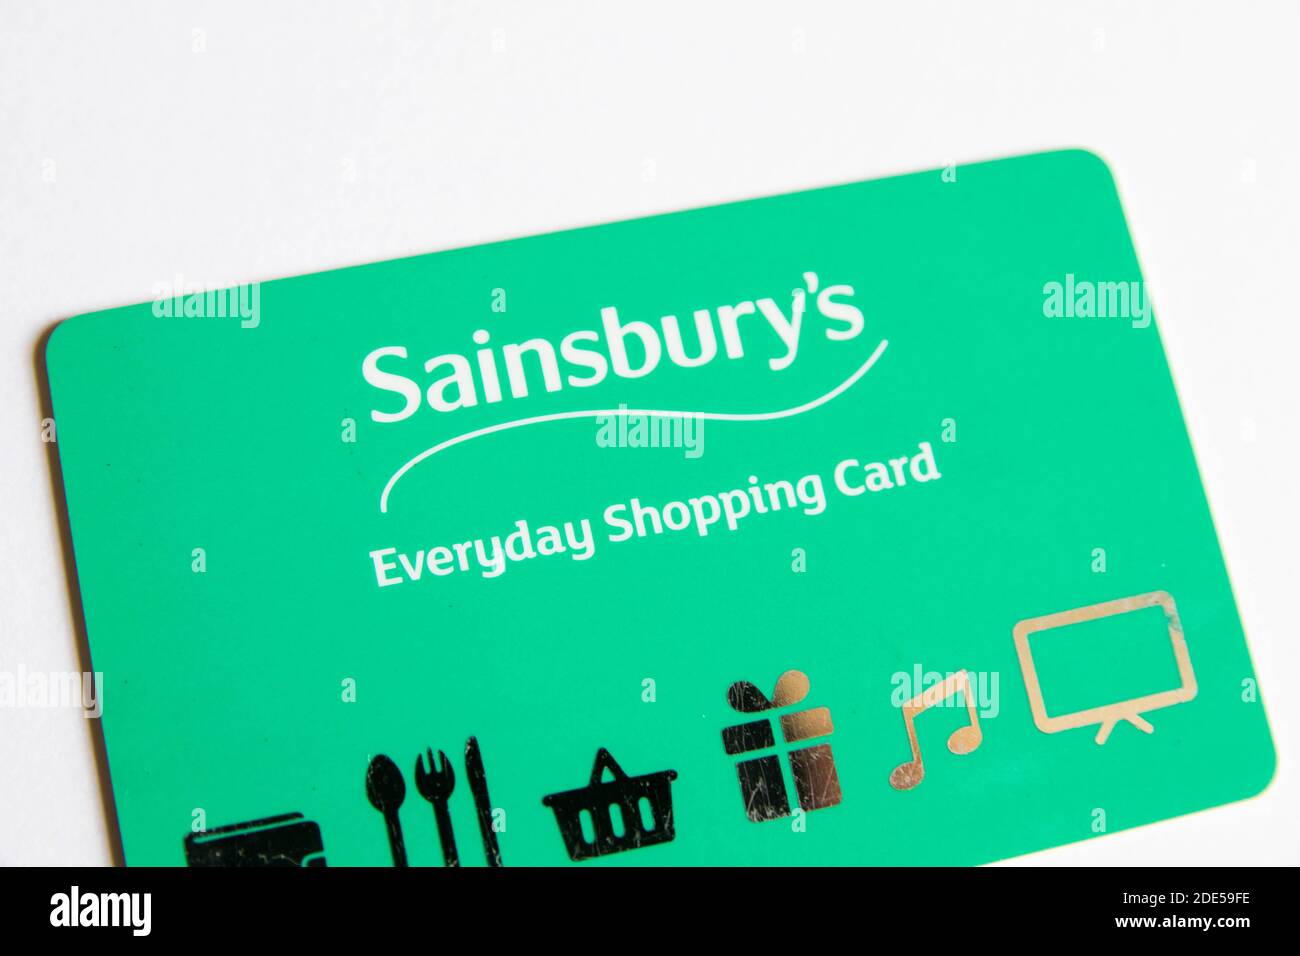 Sainsburys Loyalty Card High Resolution Stock Photography and Images - Alamy